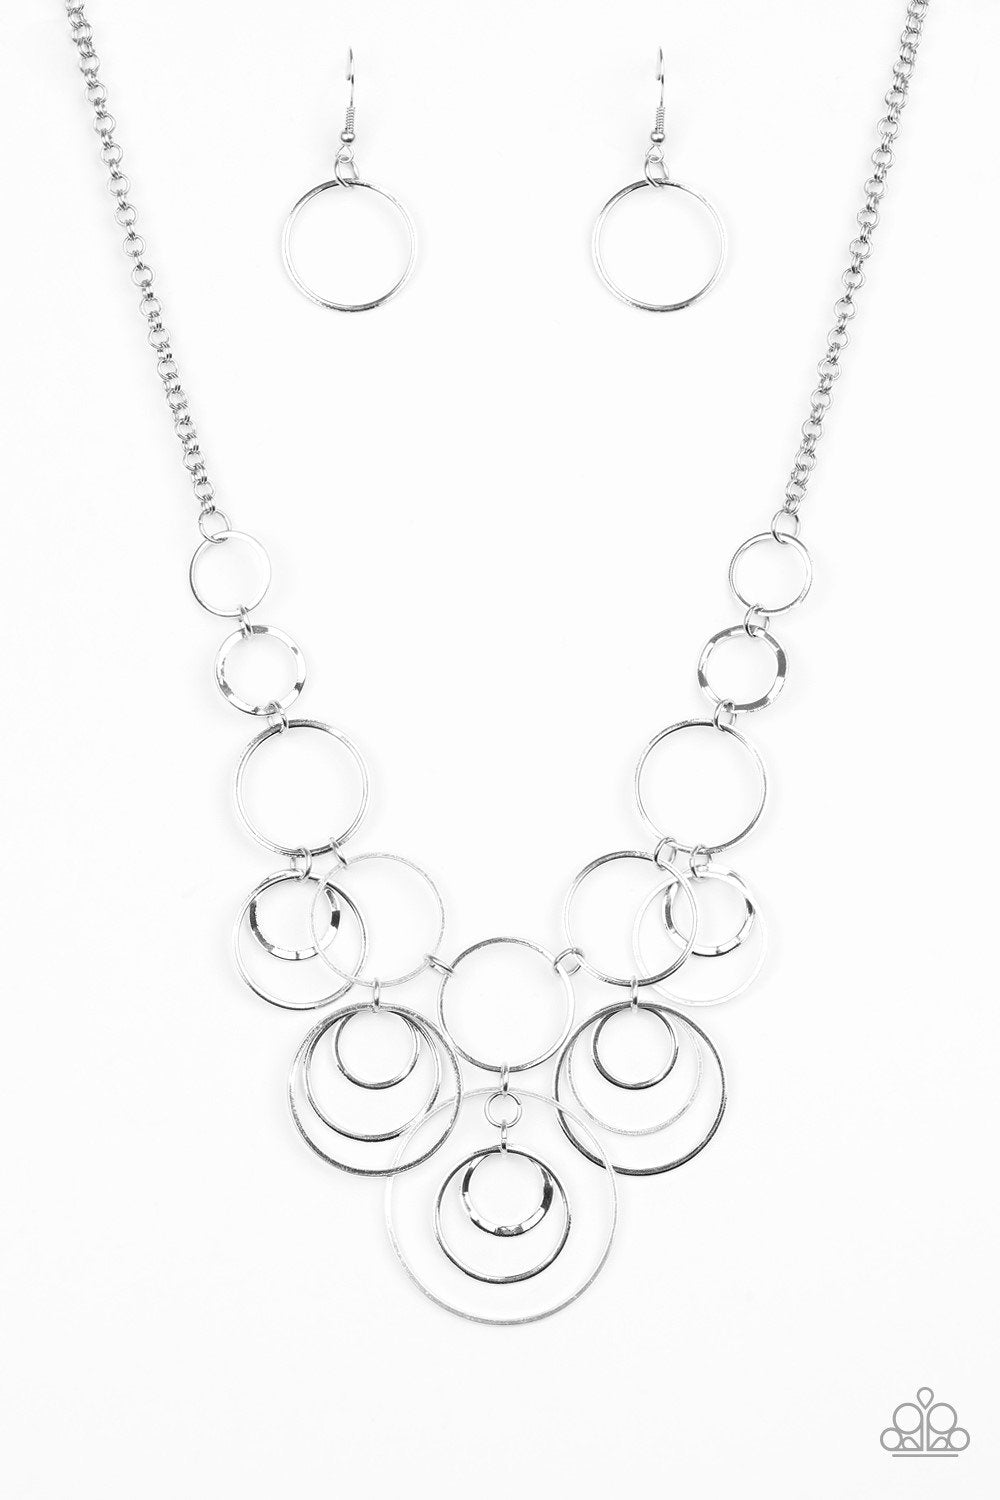 Paparazzi Necklace - Break The Cycle - Silver